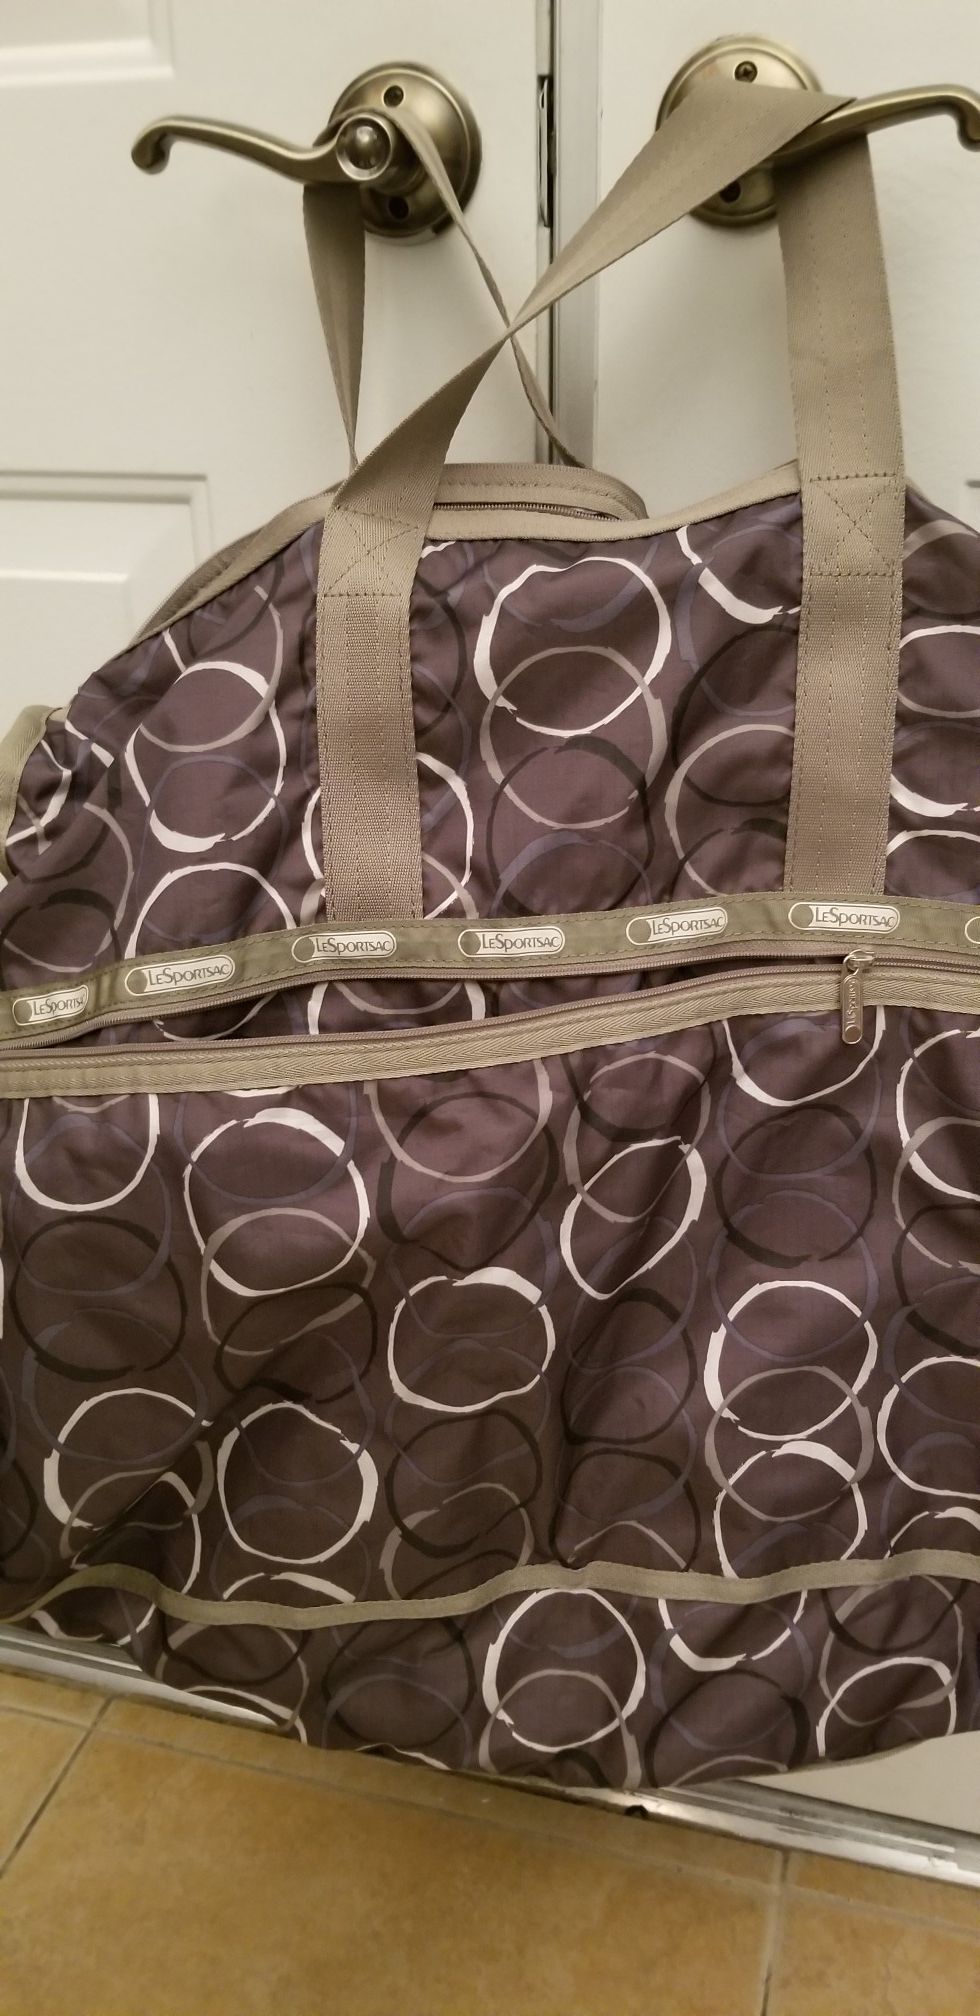 Super Large Duffle bag by Le Sport Sac. In GREAT condition. Very clean, gently used,many pockets 18$